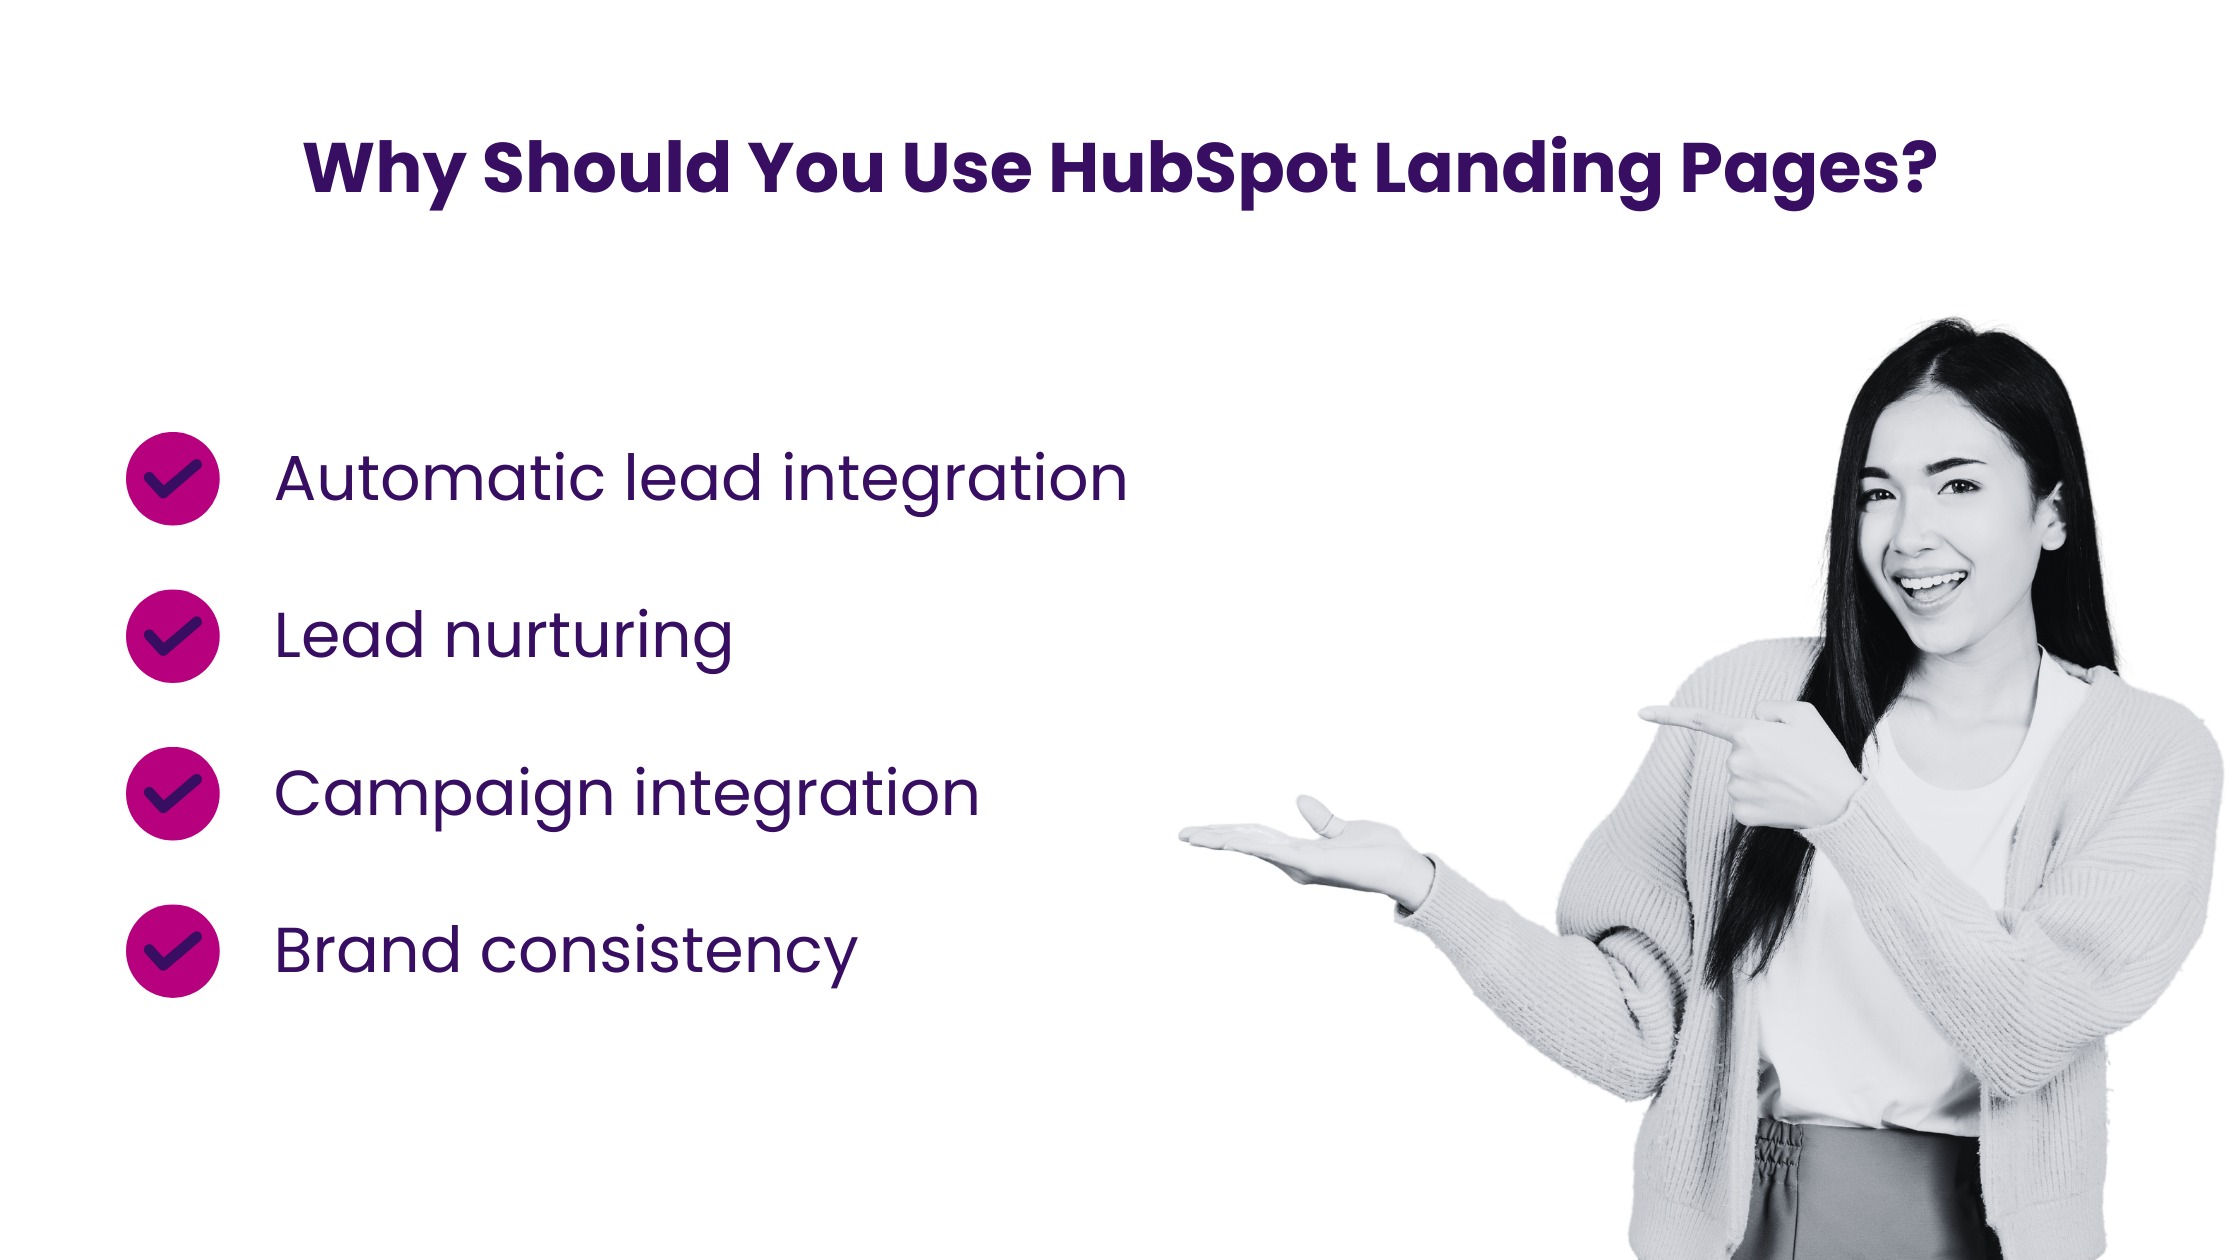 Why Should You Use HubSpot Landing Pages